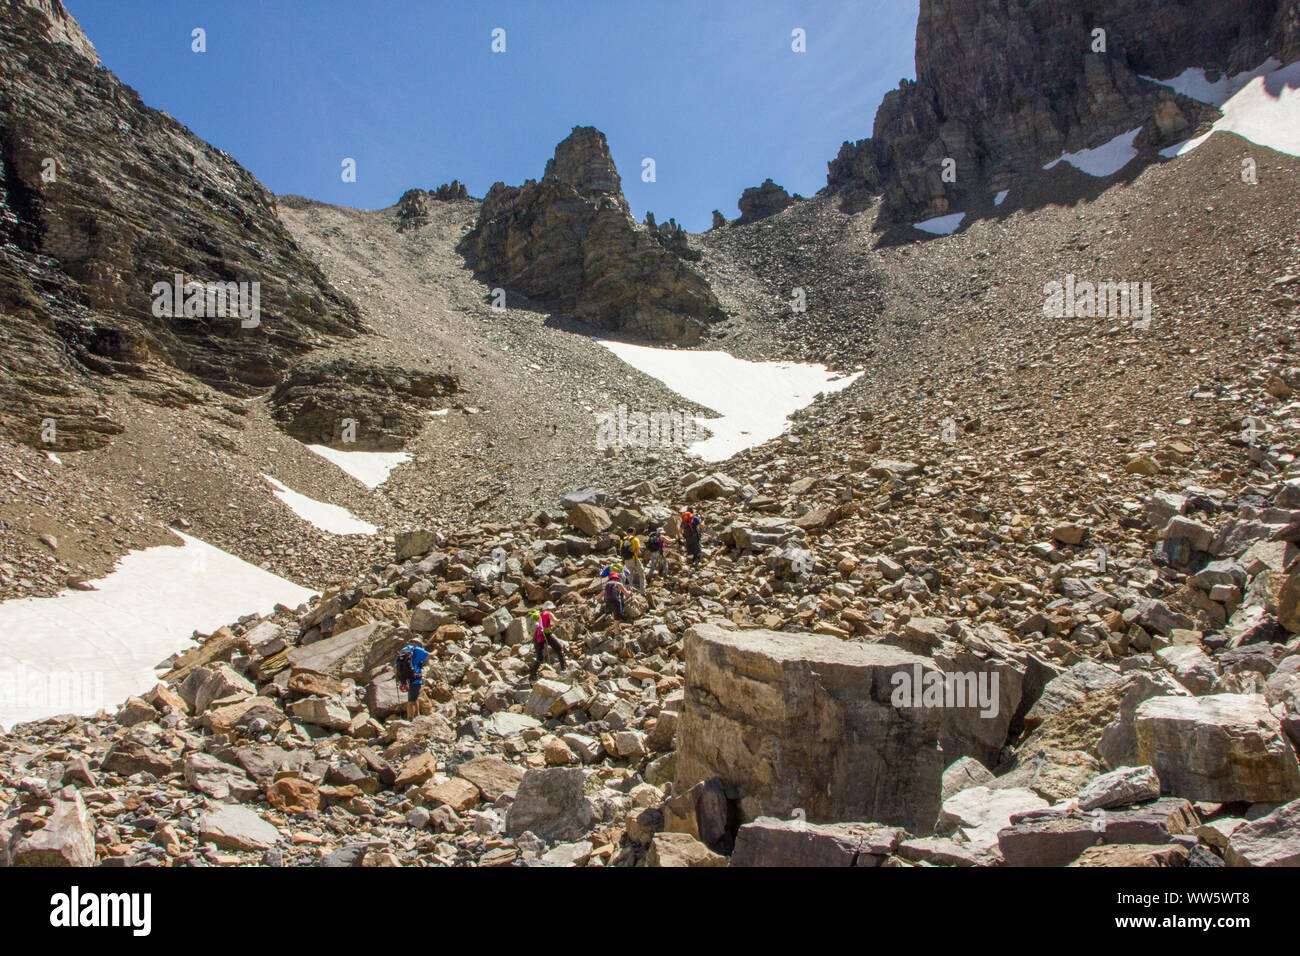 Hiker in a scree field in the Rocky Mountains Stock Photo